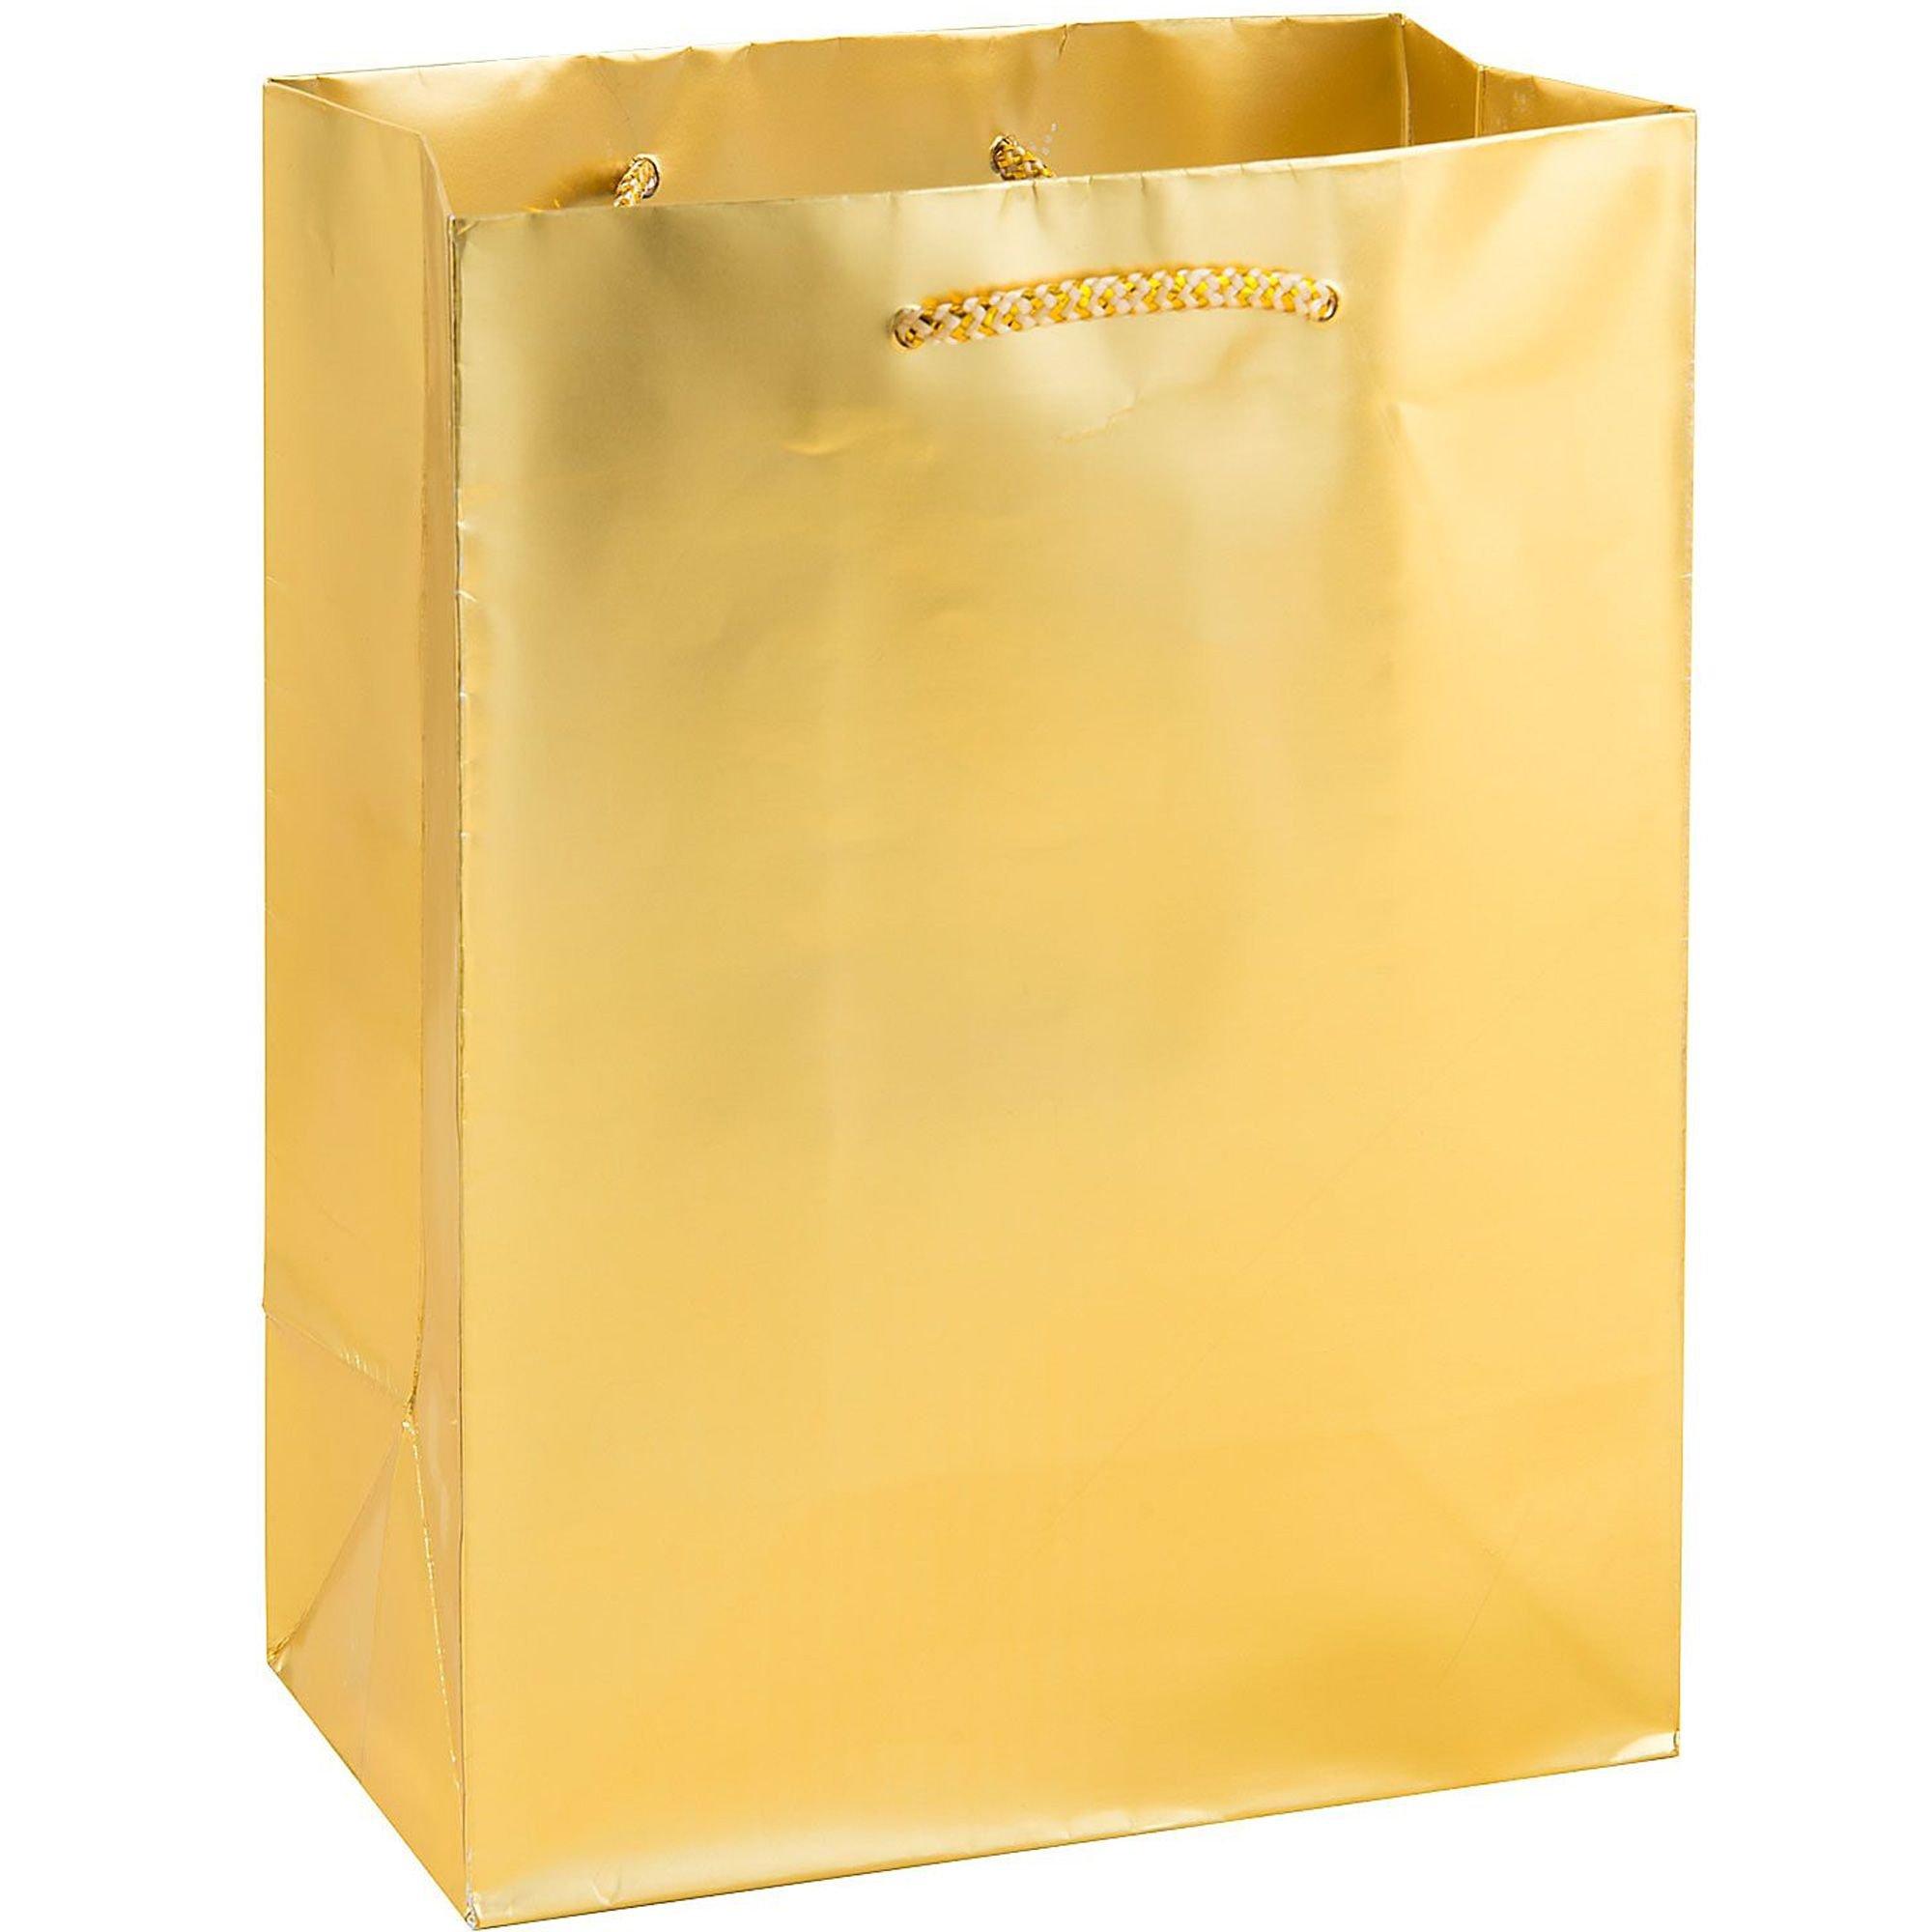 Hallmark 13 Large Gift Bag with Tissue Paper (Gold Foil Dots on Silver) for Engagements, Bridal Showers, Weddings, Graduation, Any Occasion - 1 ct